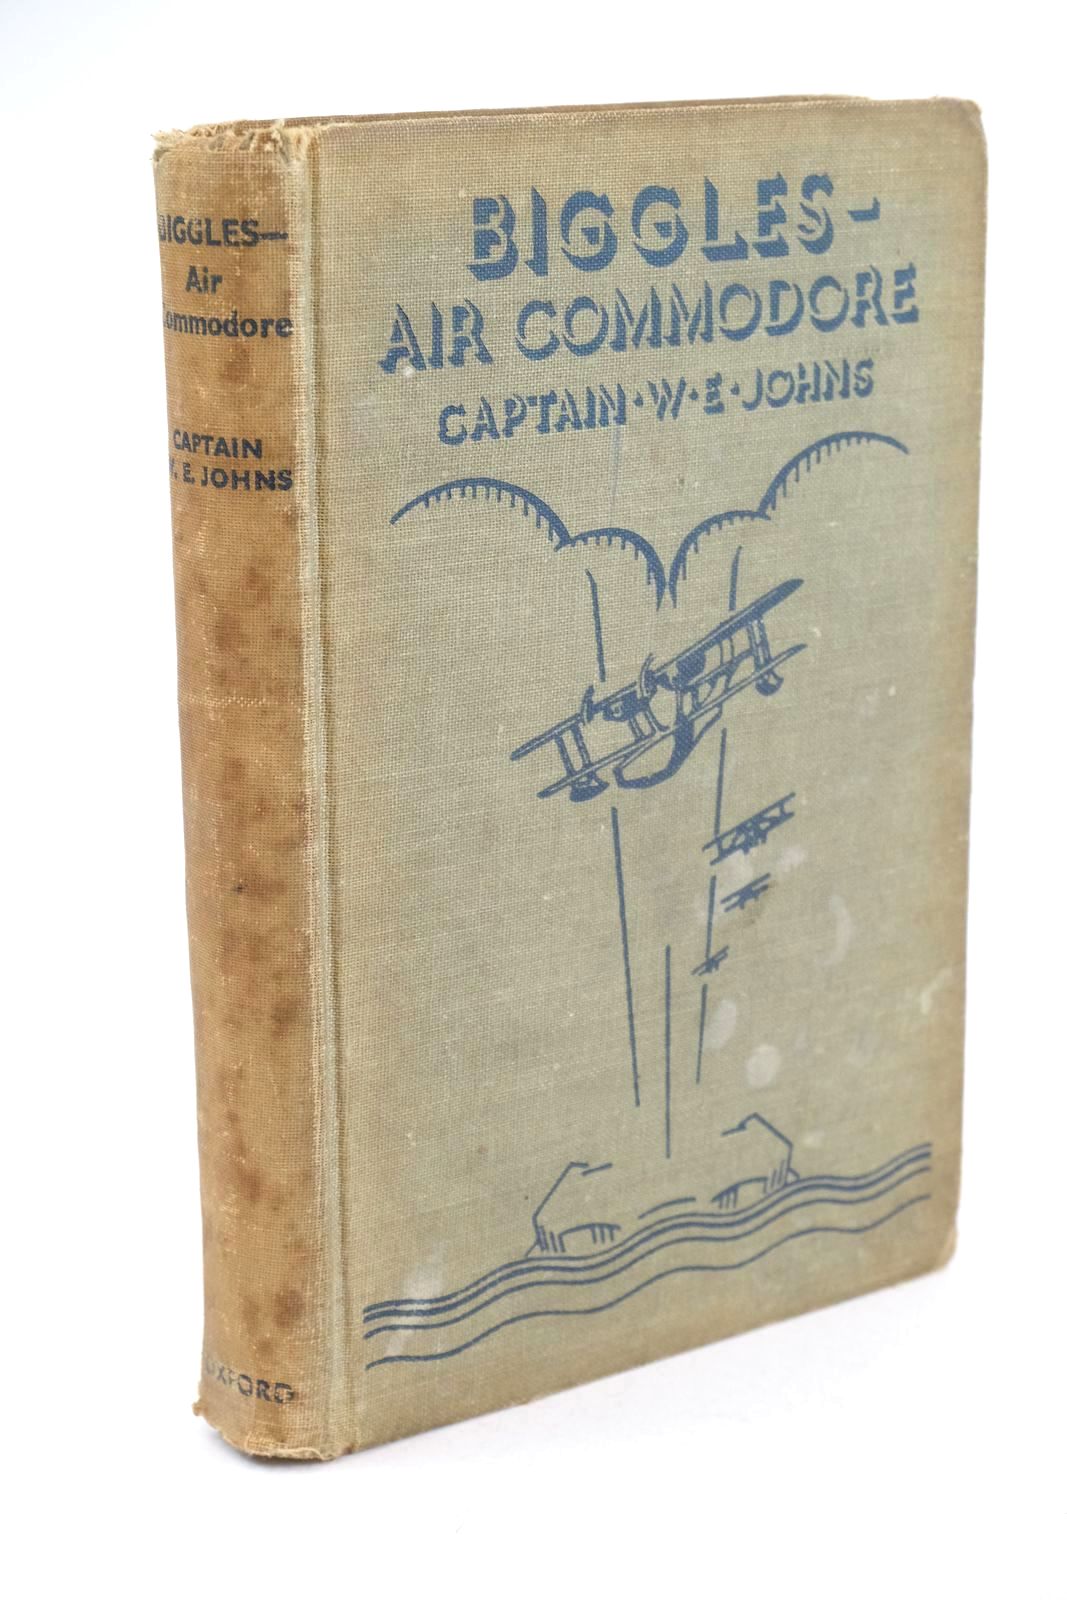 Photo of BIGGLES - AIR COMMODORE written by Johns, W.E. illustrated by Leigh, Howard
Sindall, Alfred published by Oxford University Press, Geoffrey Cumberlege (STOCK CODE: 1324859)  for sale by Stella & Rose's Books